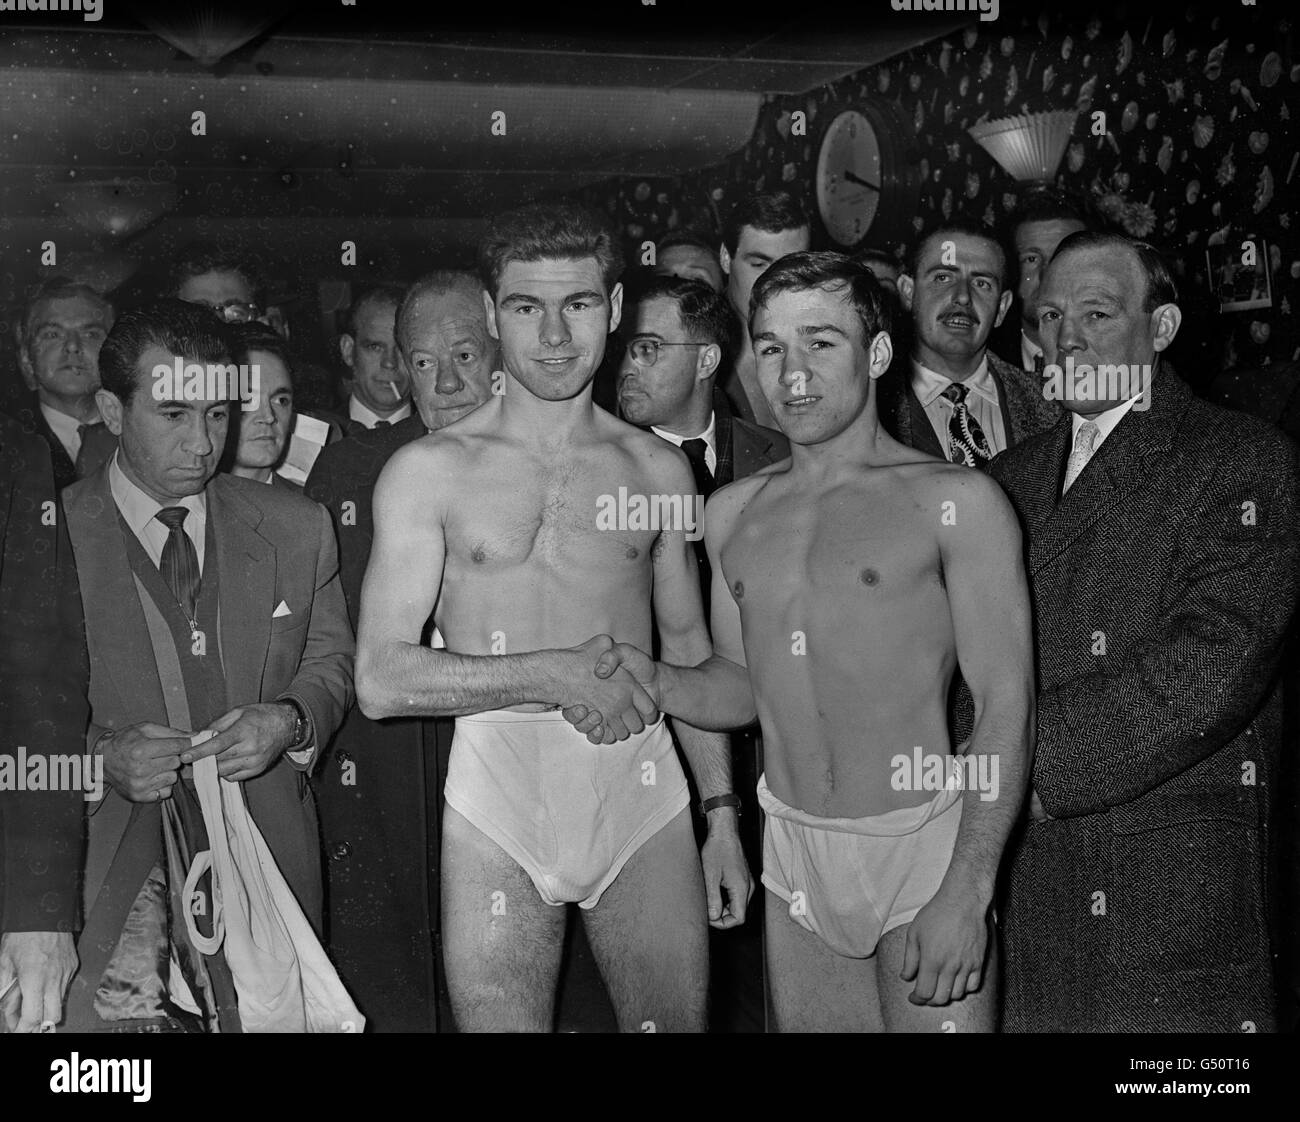 Boxing - Lightweight Professional Tournament - Weigh-in - Ron Hinson v Dave Charnley - Toby's Gym, London Stock Photo